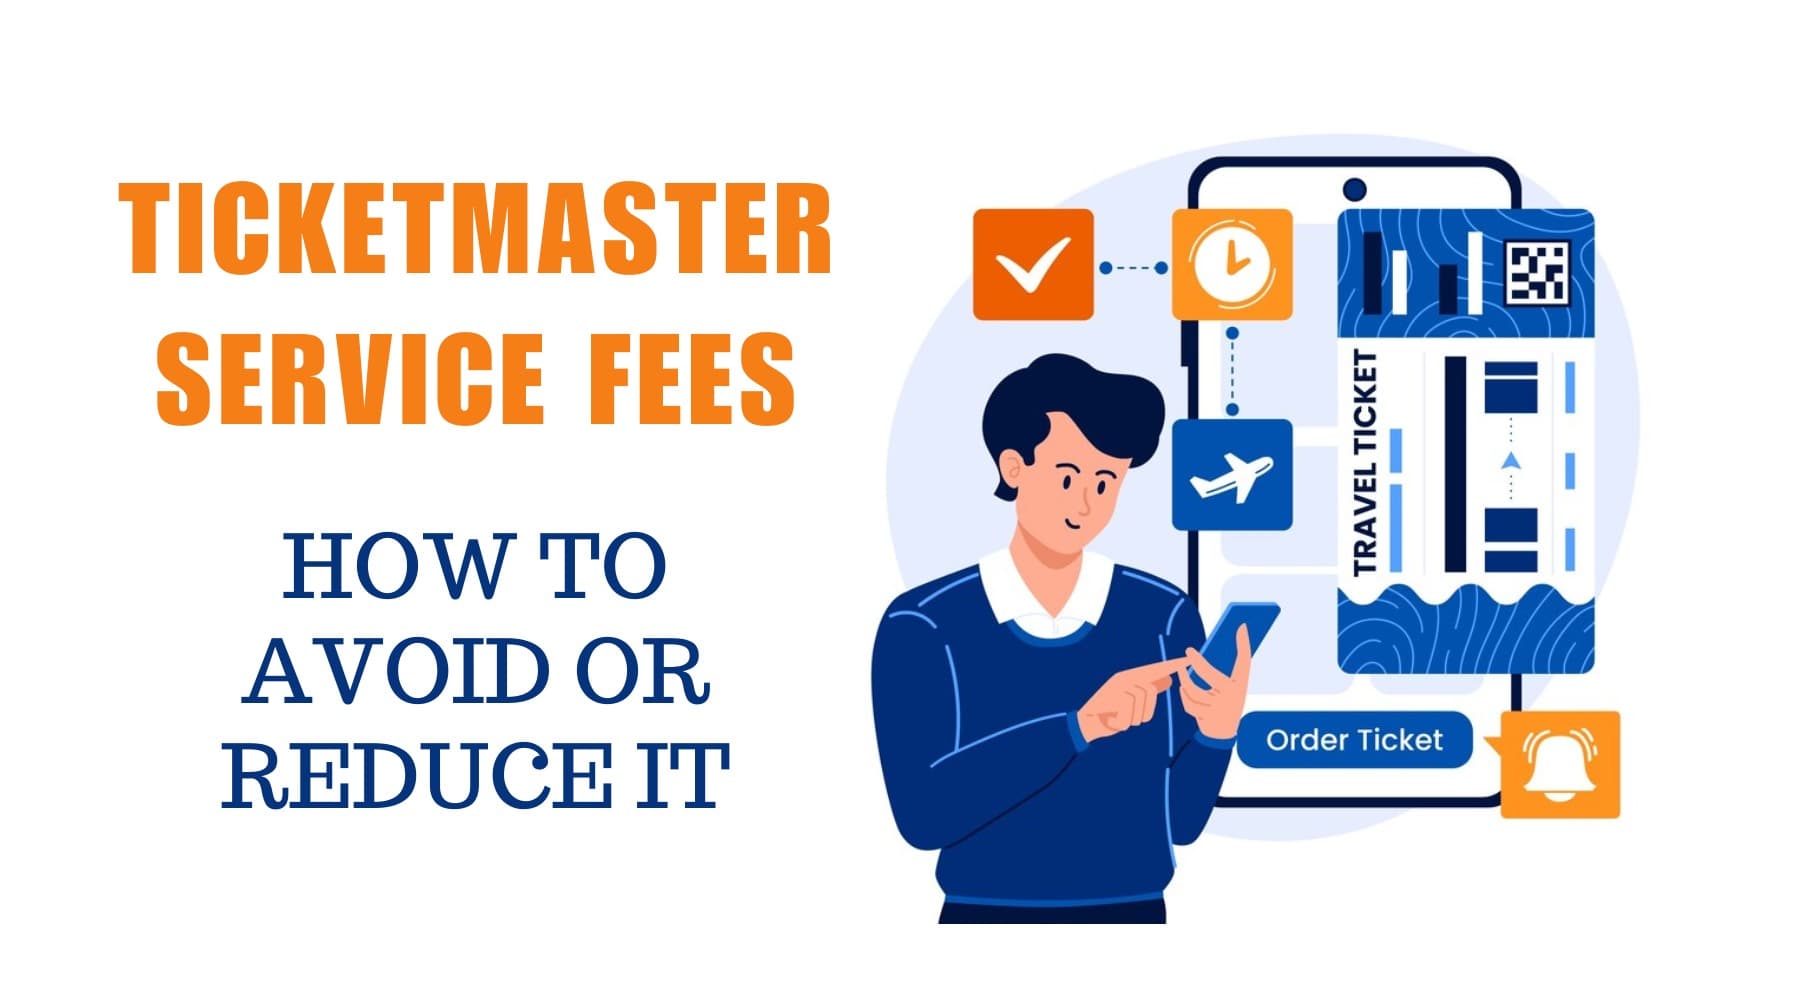 How to Avoid Ticketmaster Service Fees